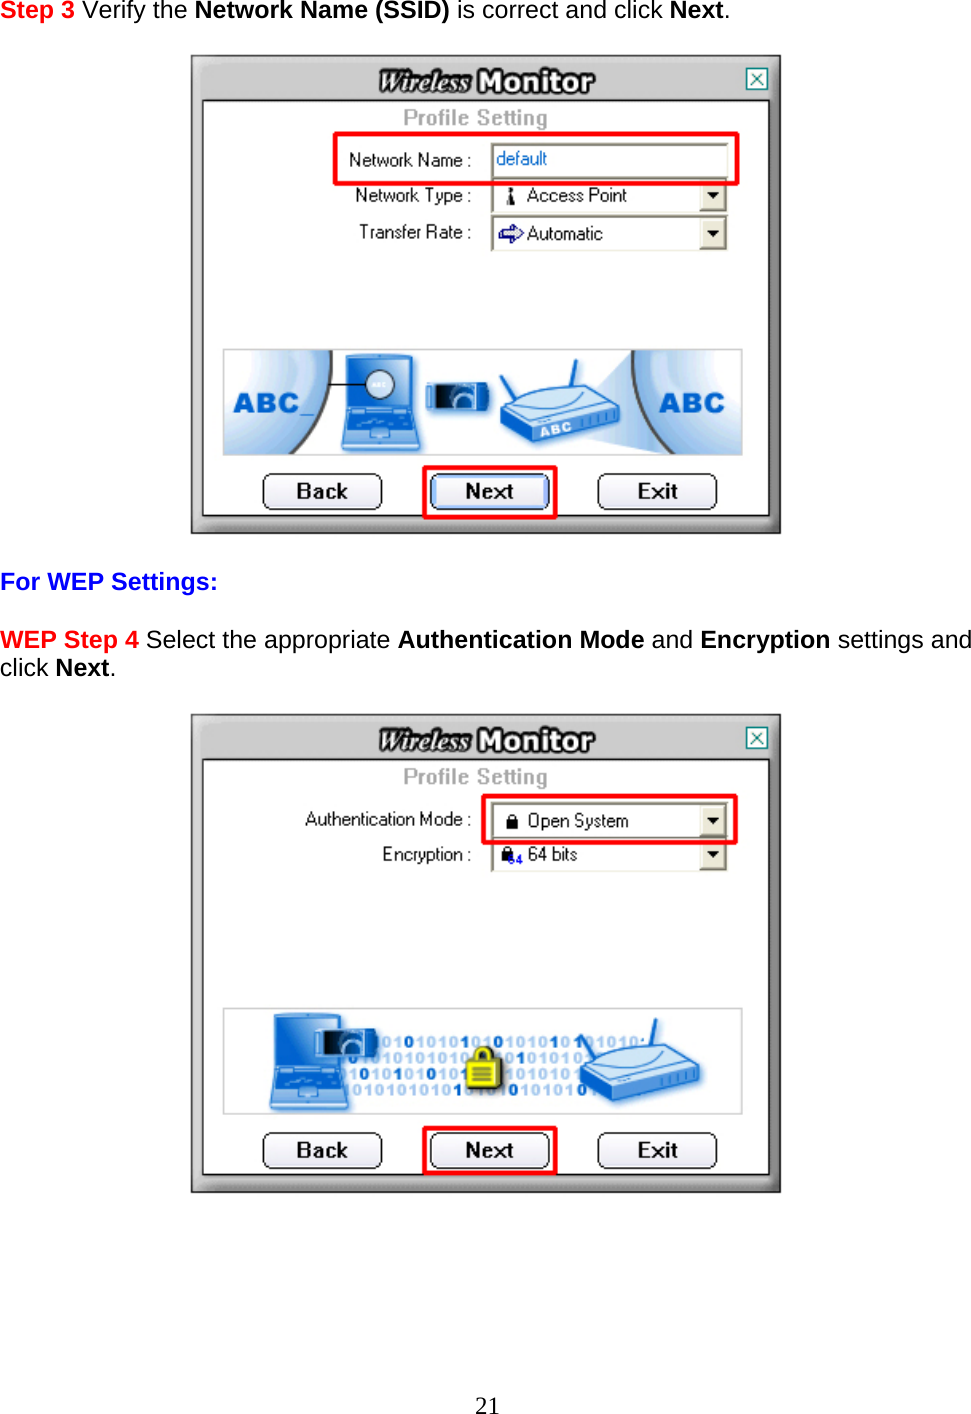 21 Step 3 Verify the Network Name (SSID) is correct and click Next.    For WEP Settings:  WEP Step 4 Select the appropriate Authentication Mode and Encryption settings and click Next.        